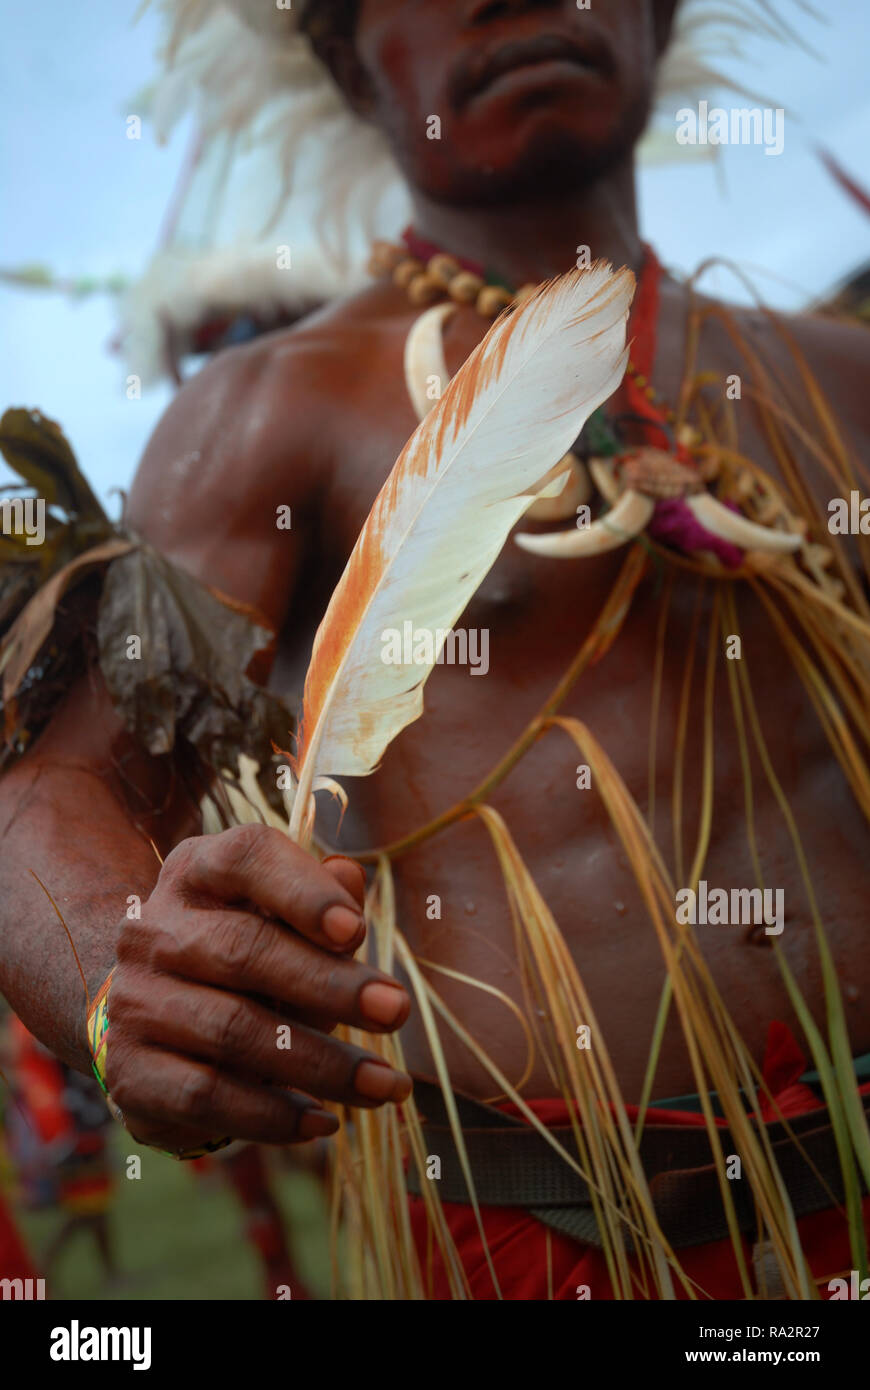 Colourfully dressed and face painted man holding a feather as part of the annual Sing Sing in Madang, Papua New Guinea. Stock Photo